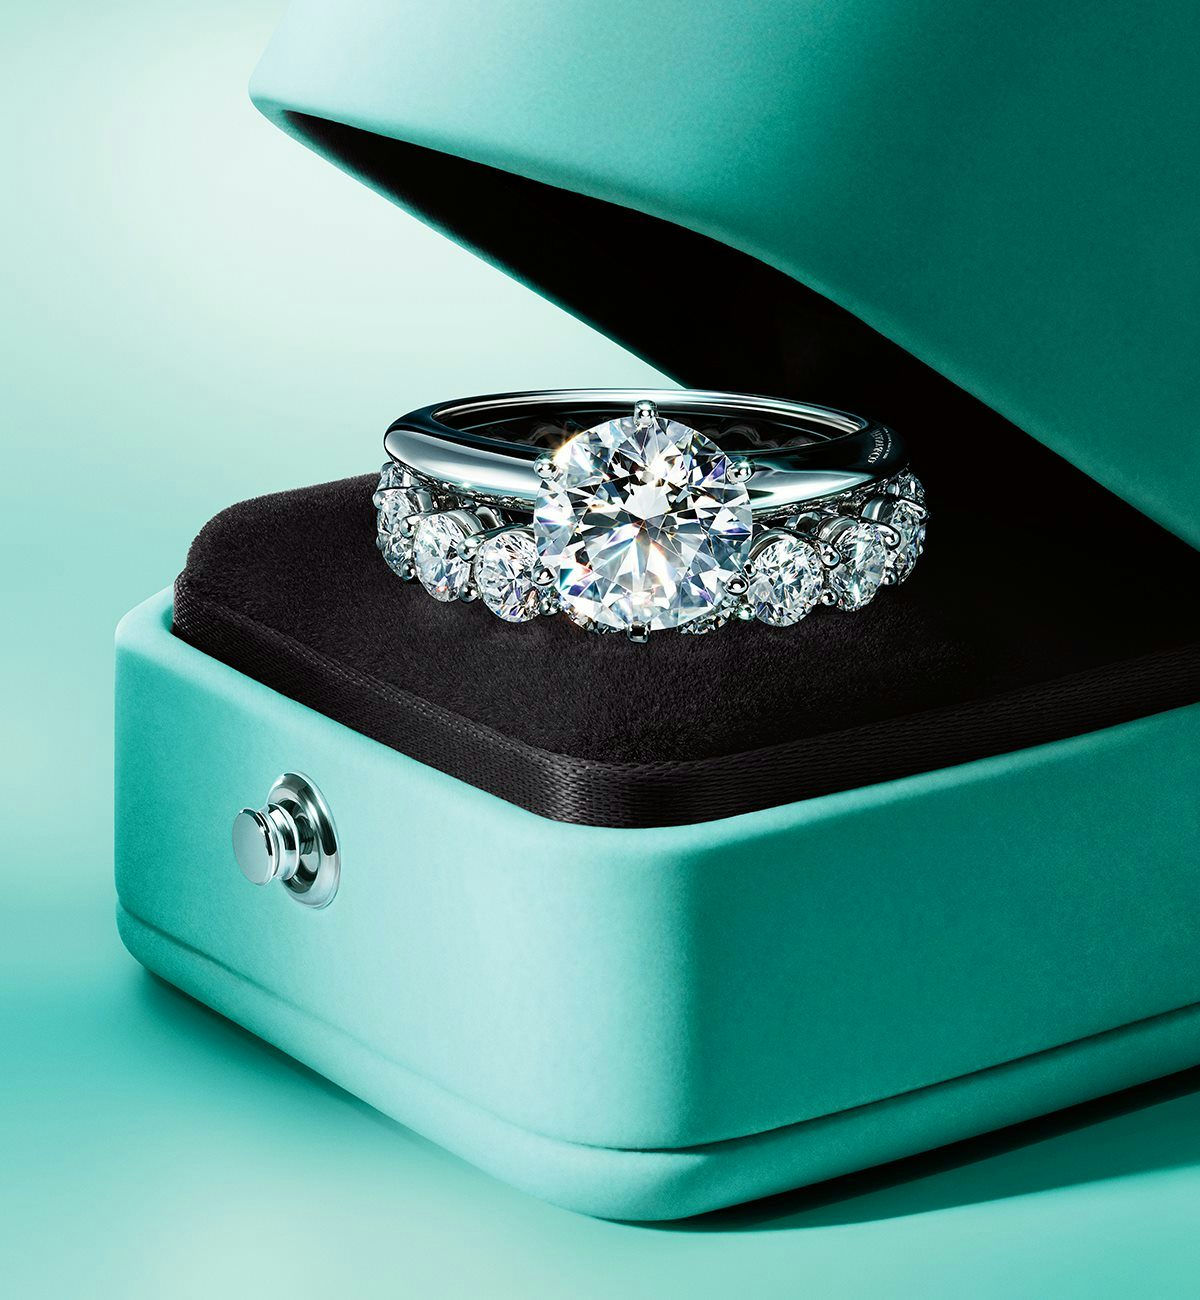 tiffany and co lost policy